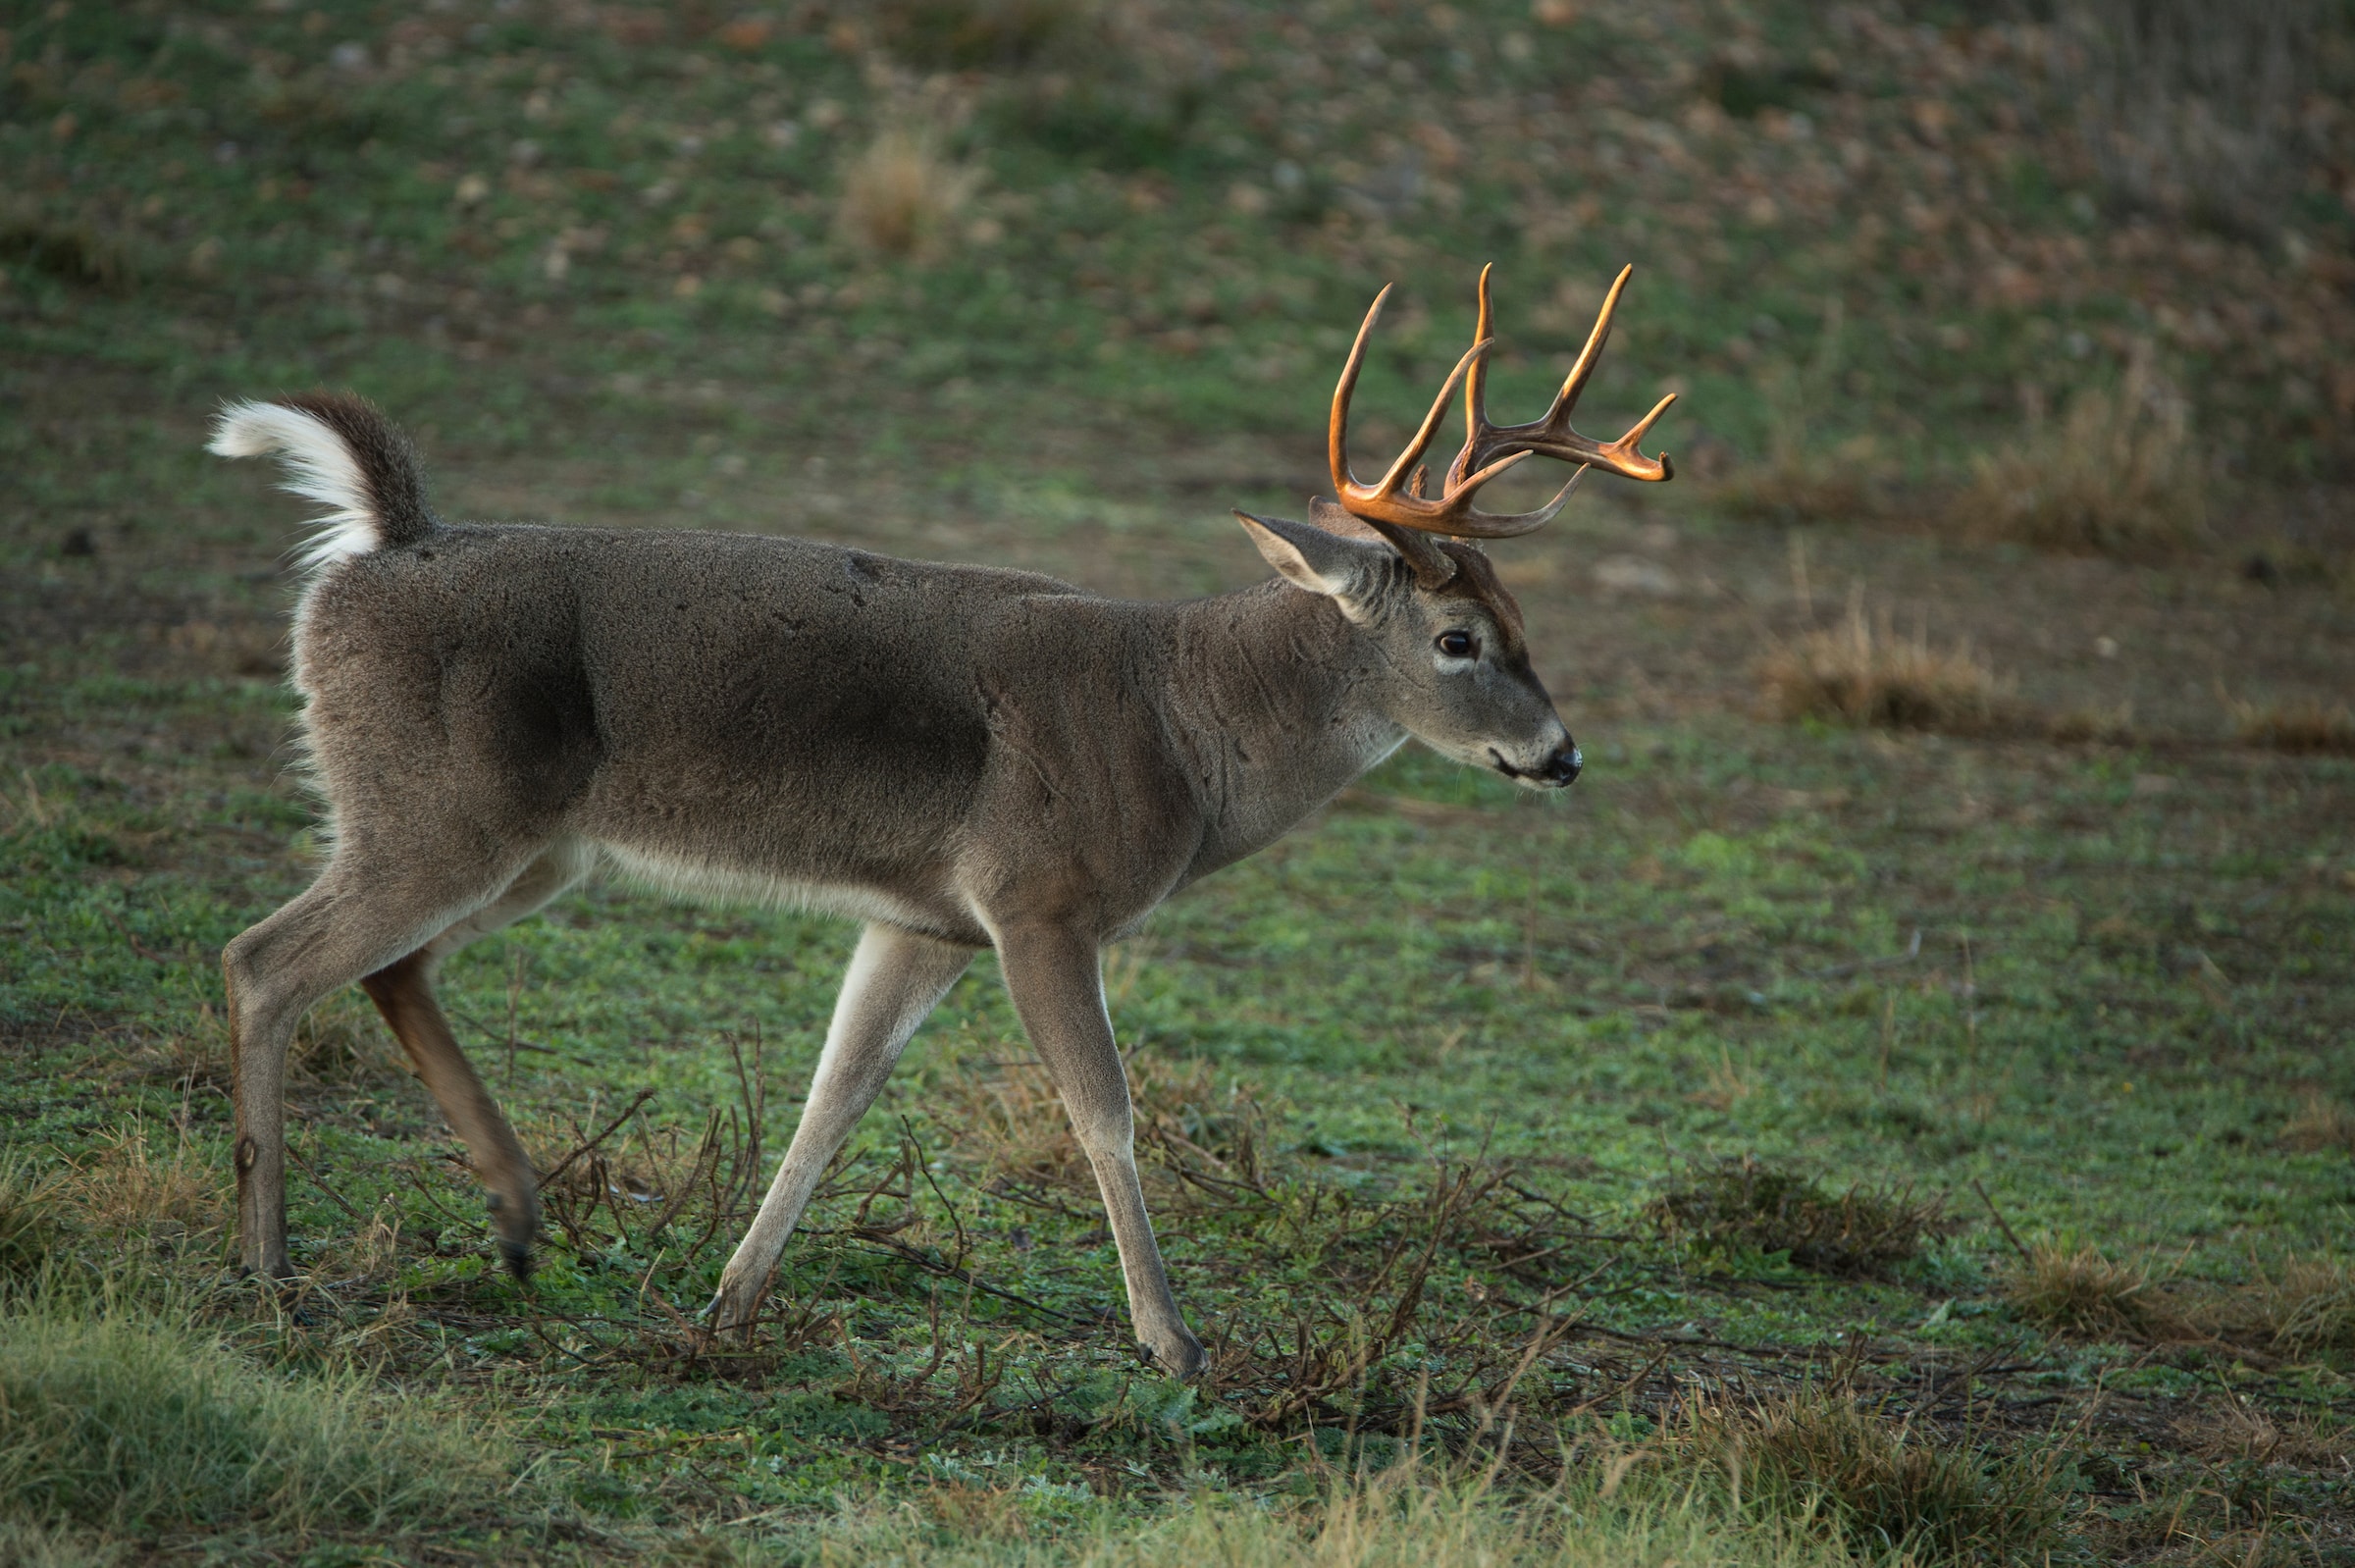 Small-property land managers can attract deer with food plots.